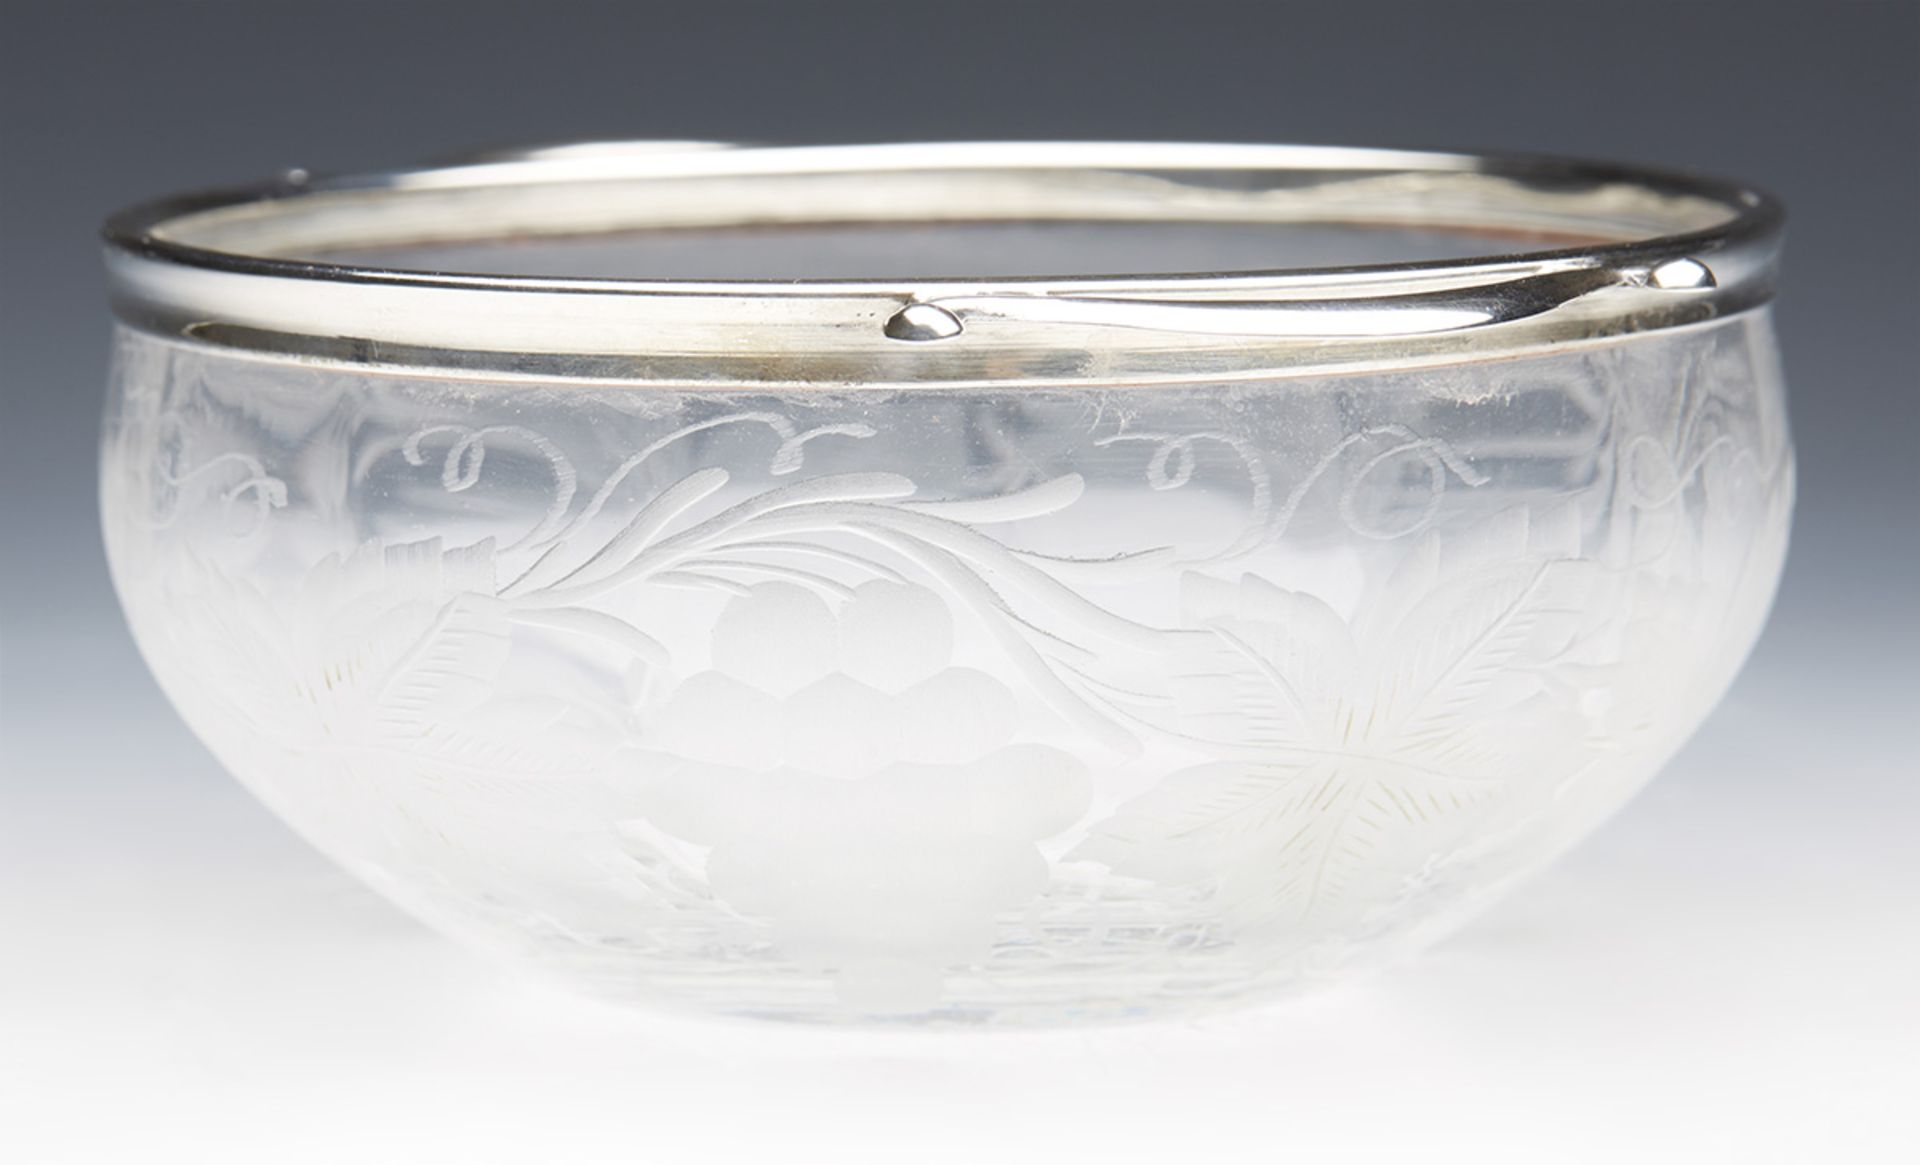 Fine Antique American Silver Mounted Engraved Glass Bowl 19Th C. - Image 3 of 9